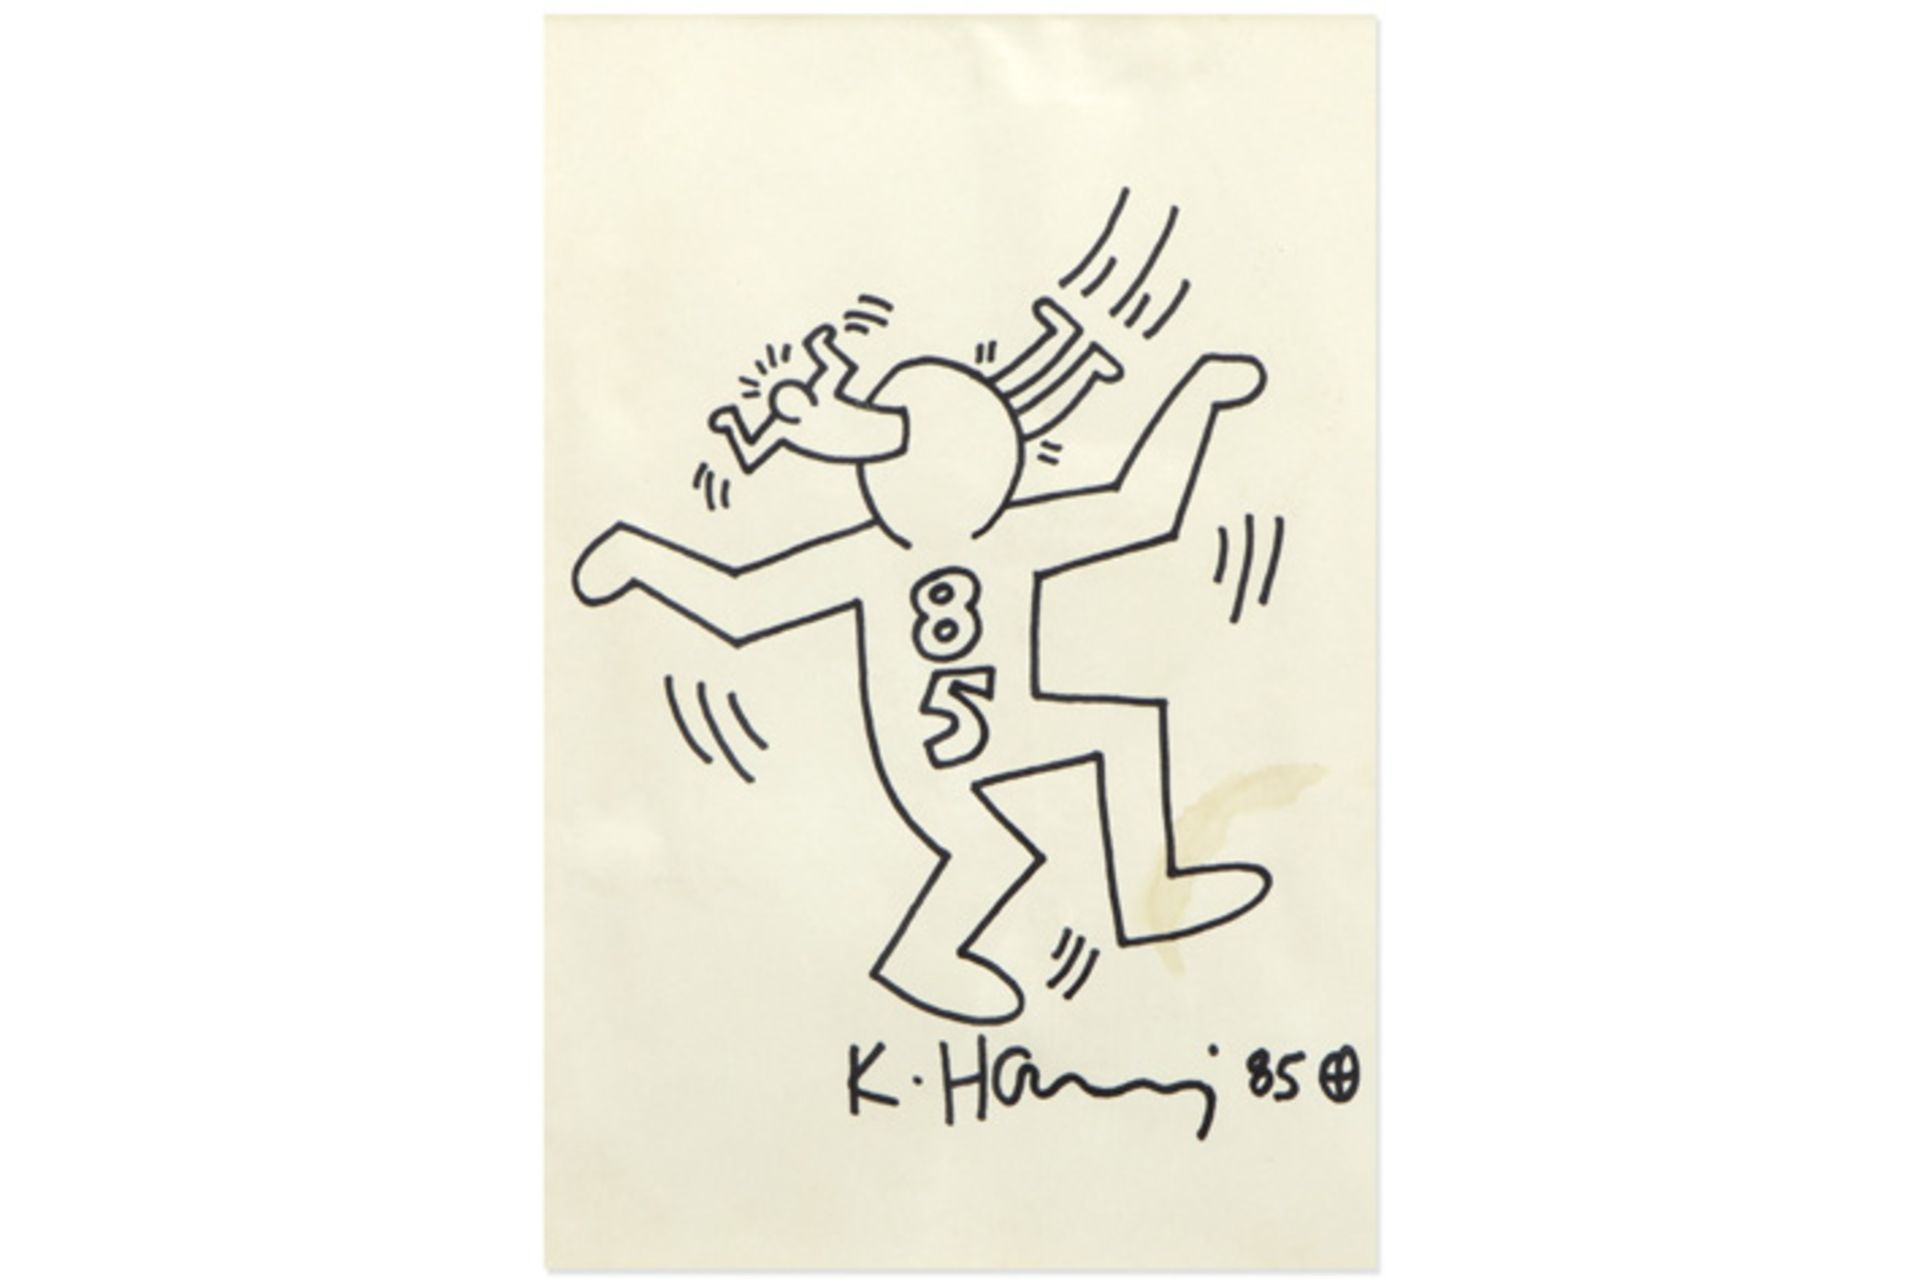 Keith Haring signed drawing dated (19)85 - with on the back a dedication "For George", a stamp of